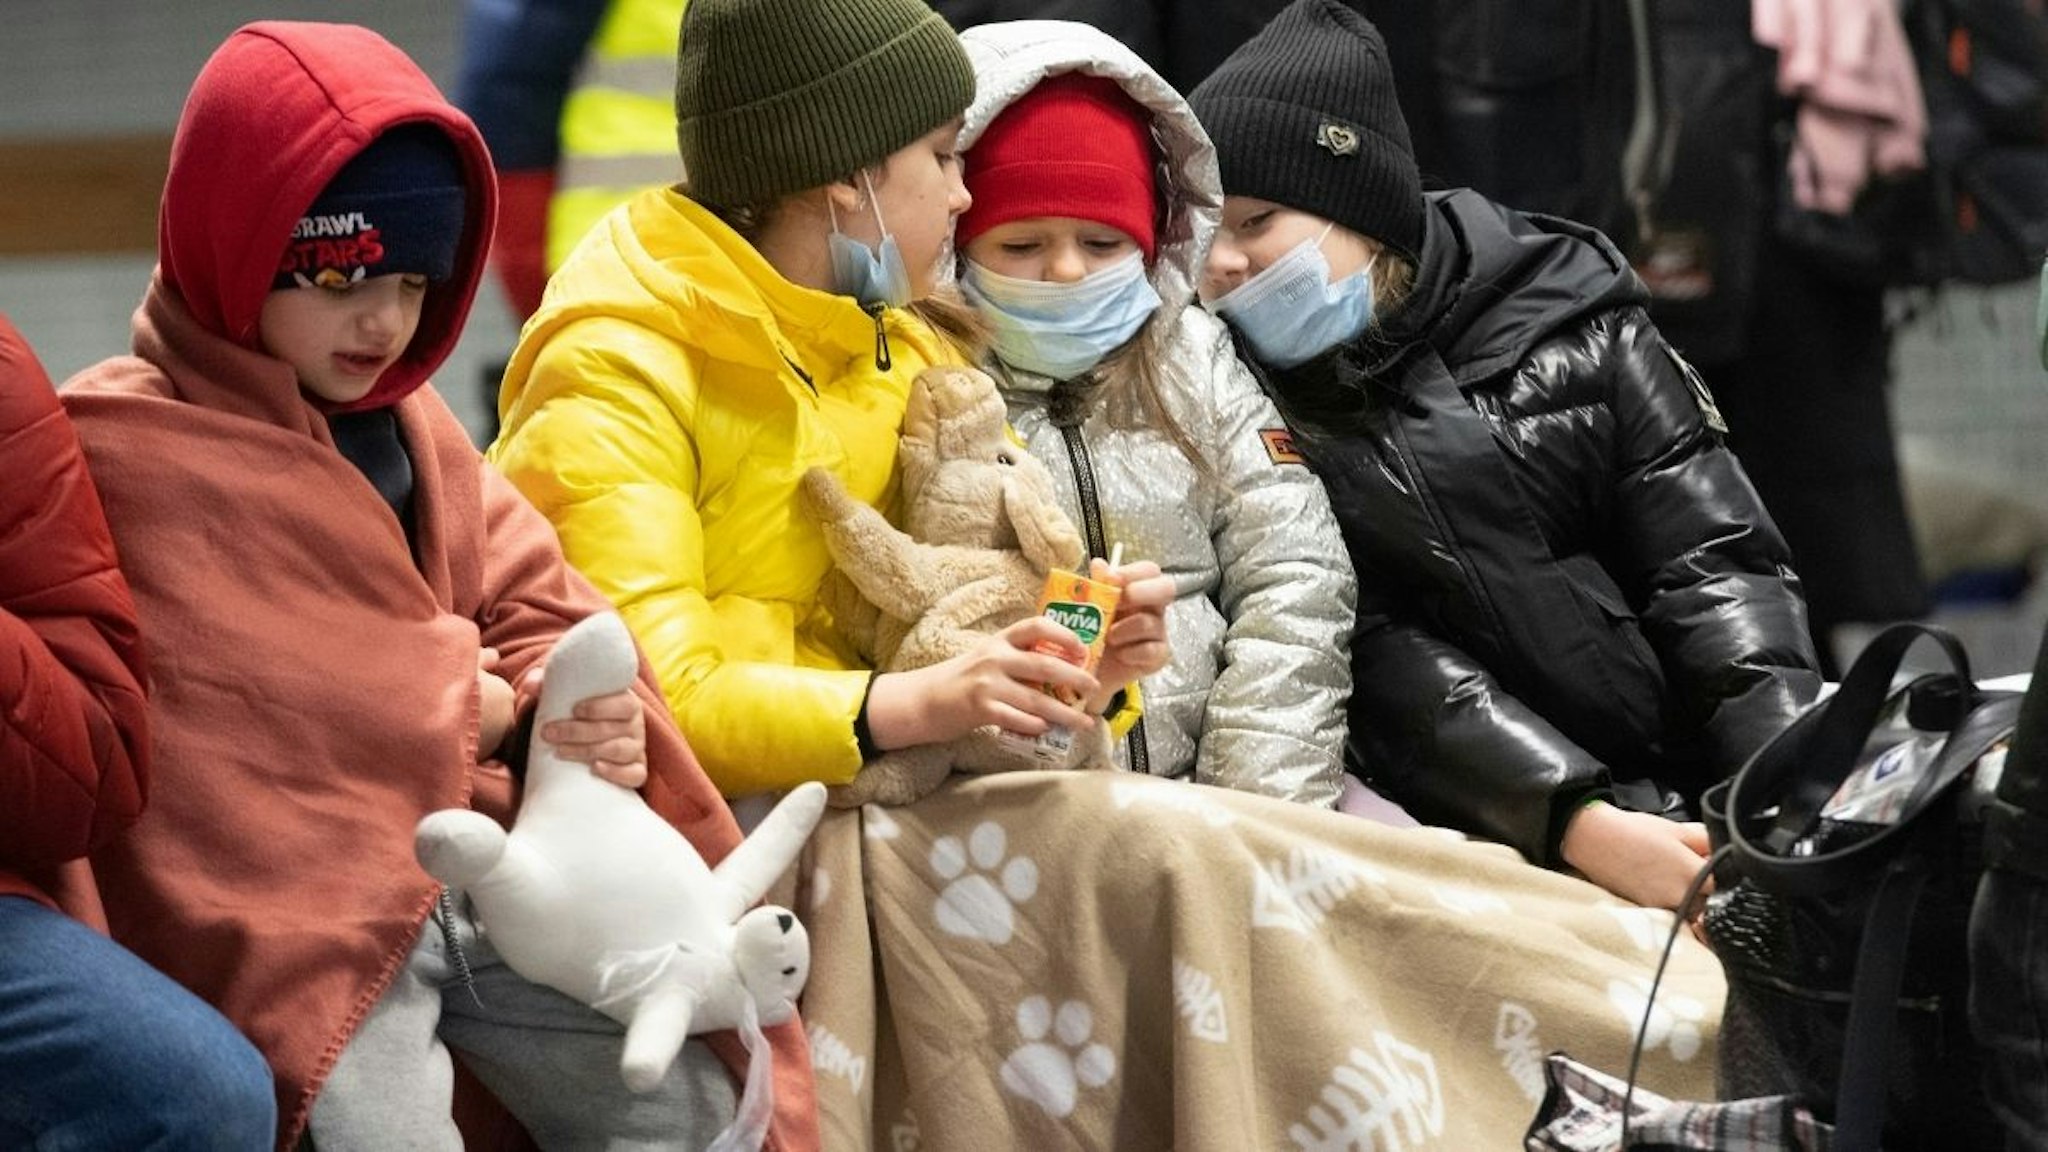 Wrapped in blankets, these children from the Ukrainian war zone sit on a bench in Berlin's main train station.